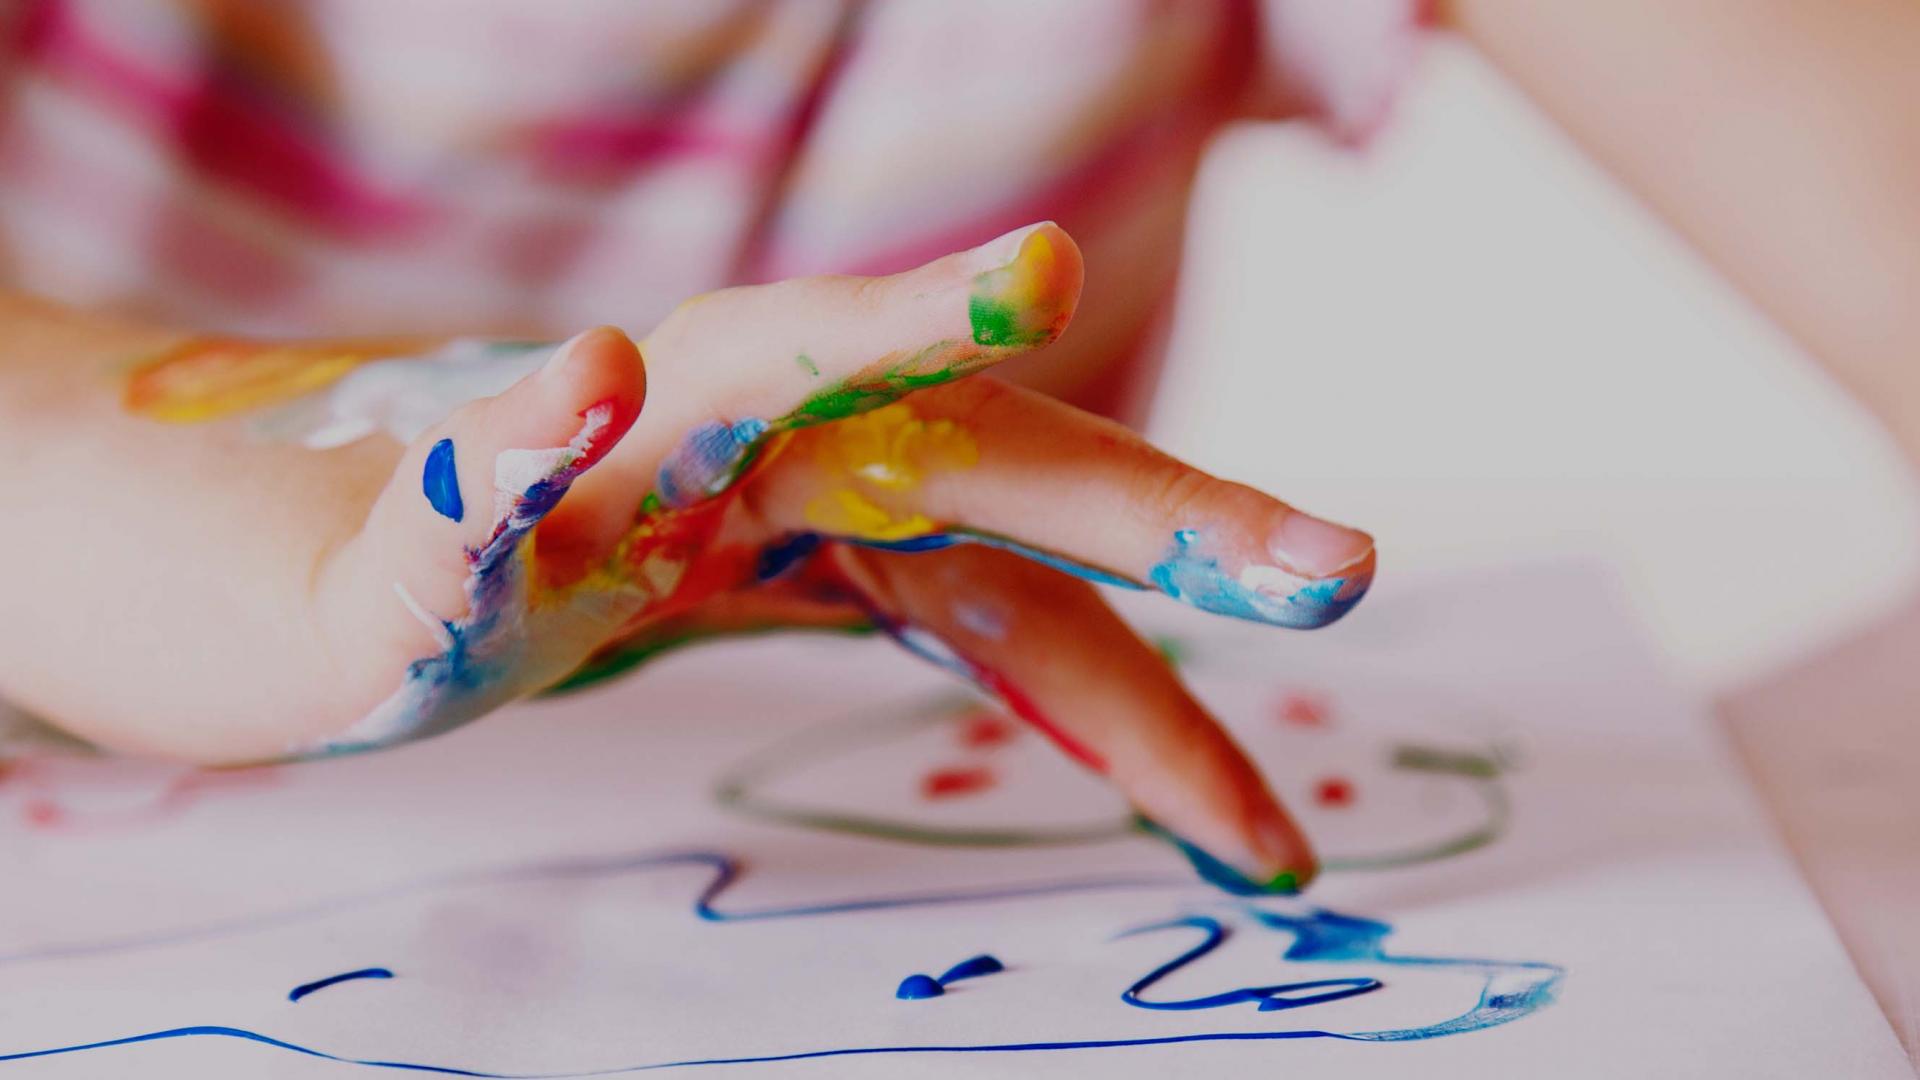 Child playing with paint